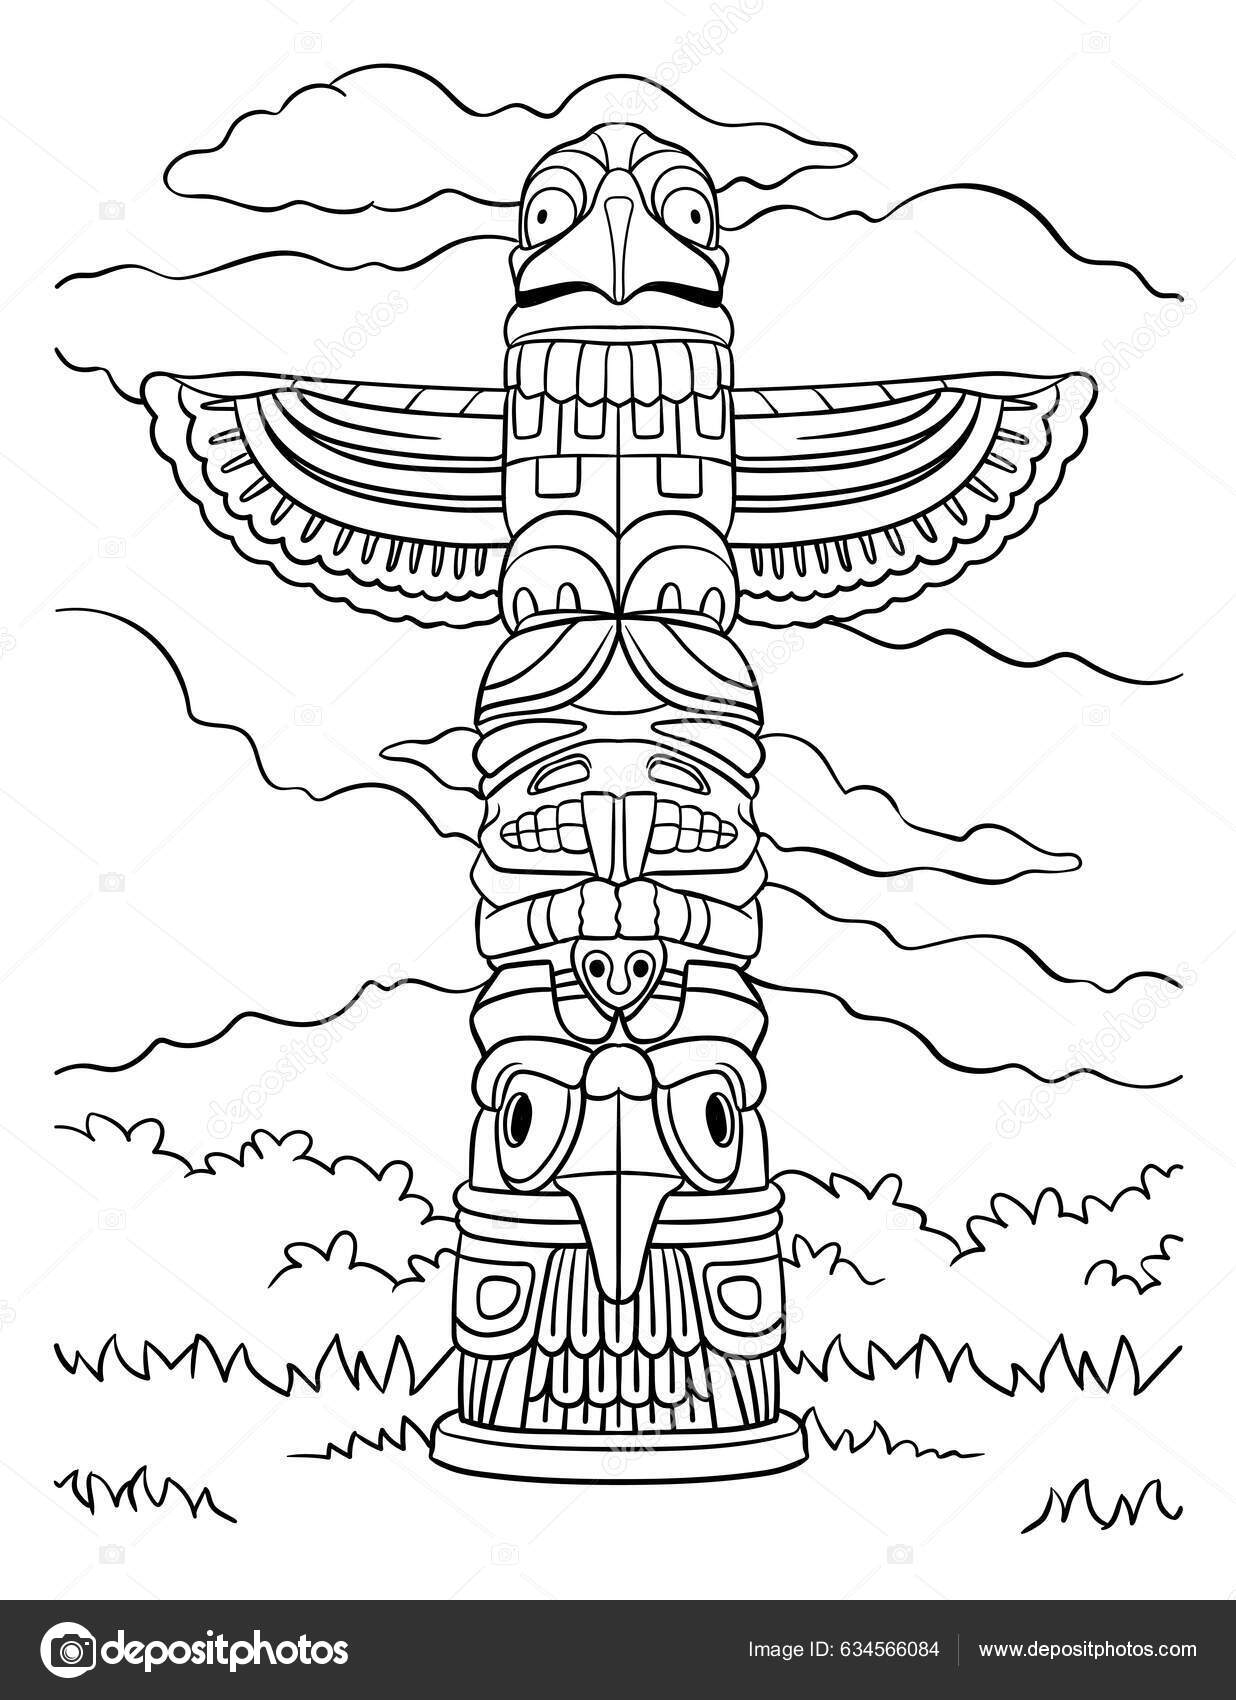 Cute funny coloring page native american indian totem provides hours stock vector by abbydesign